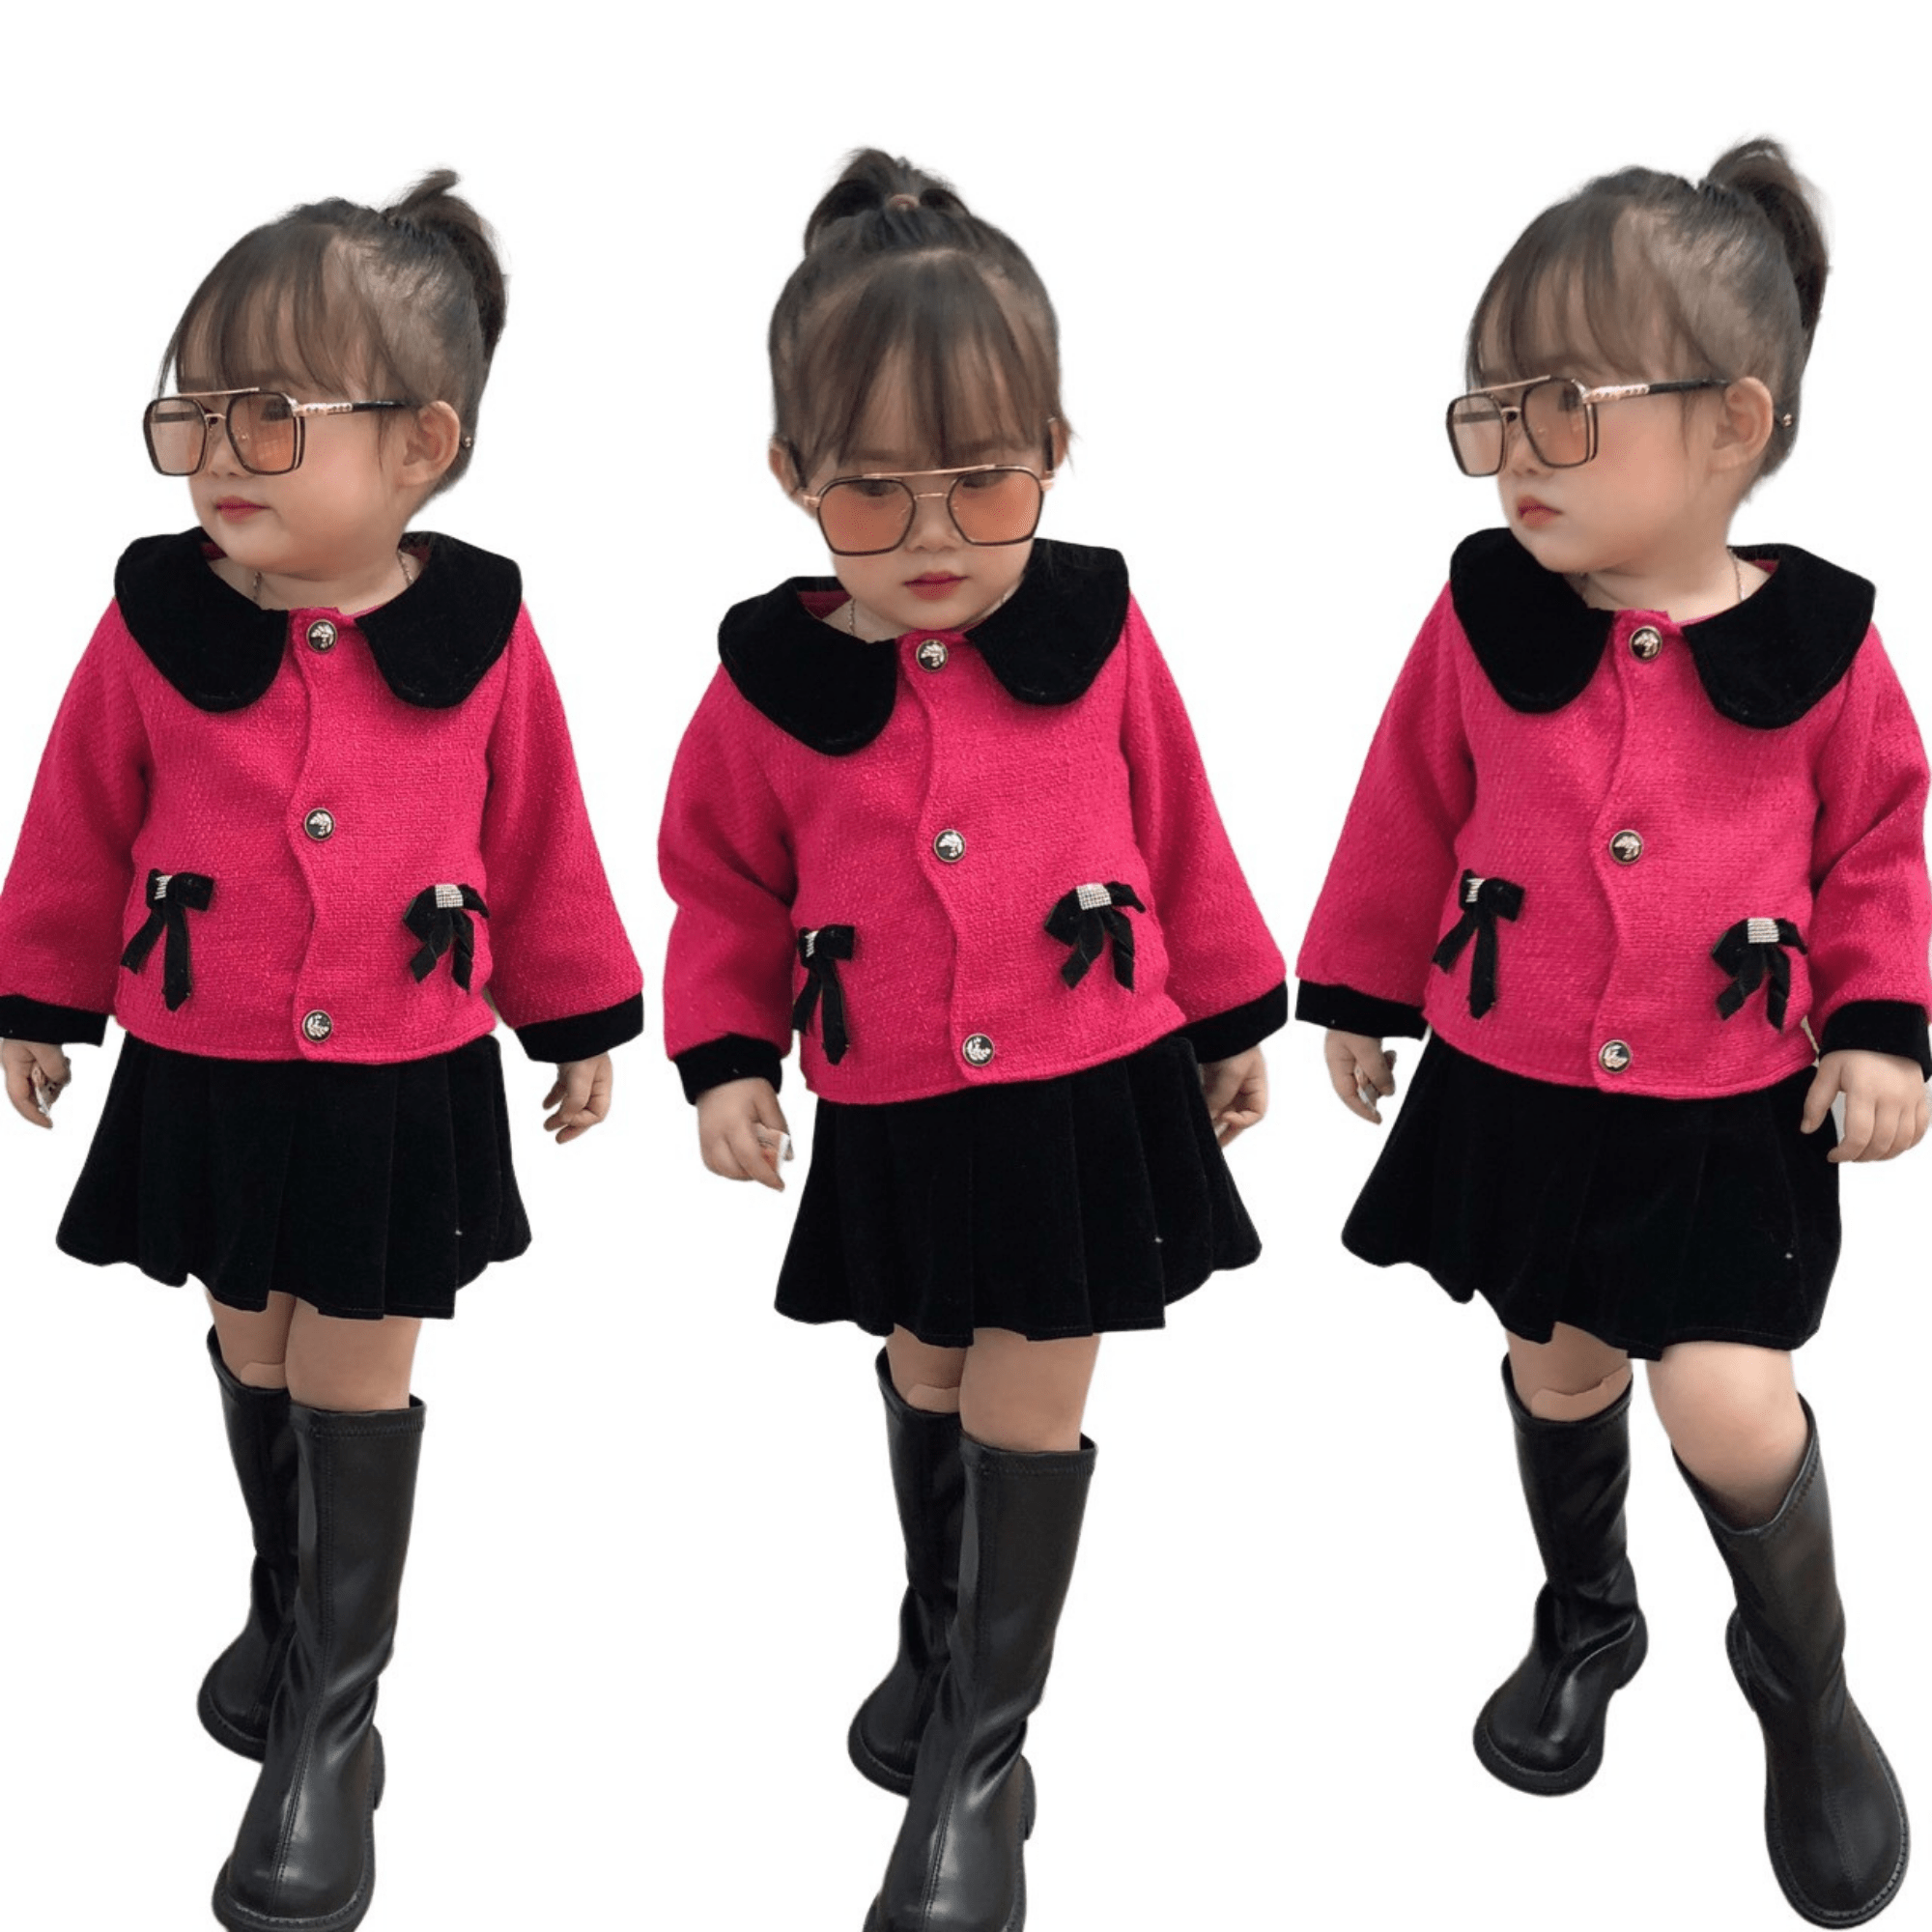 Winter Clothes For Kids Reasonable Price 100% Wool Dresses Casual Each One In Opp Bag Vietnam Manufacturer